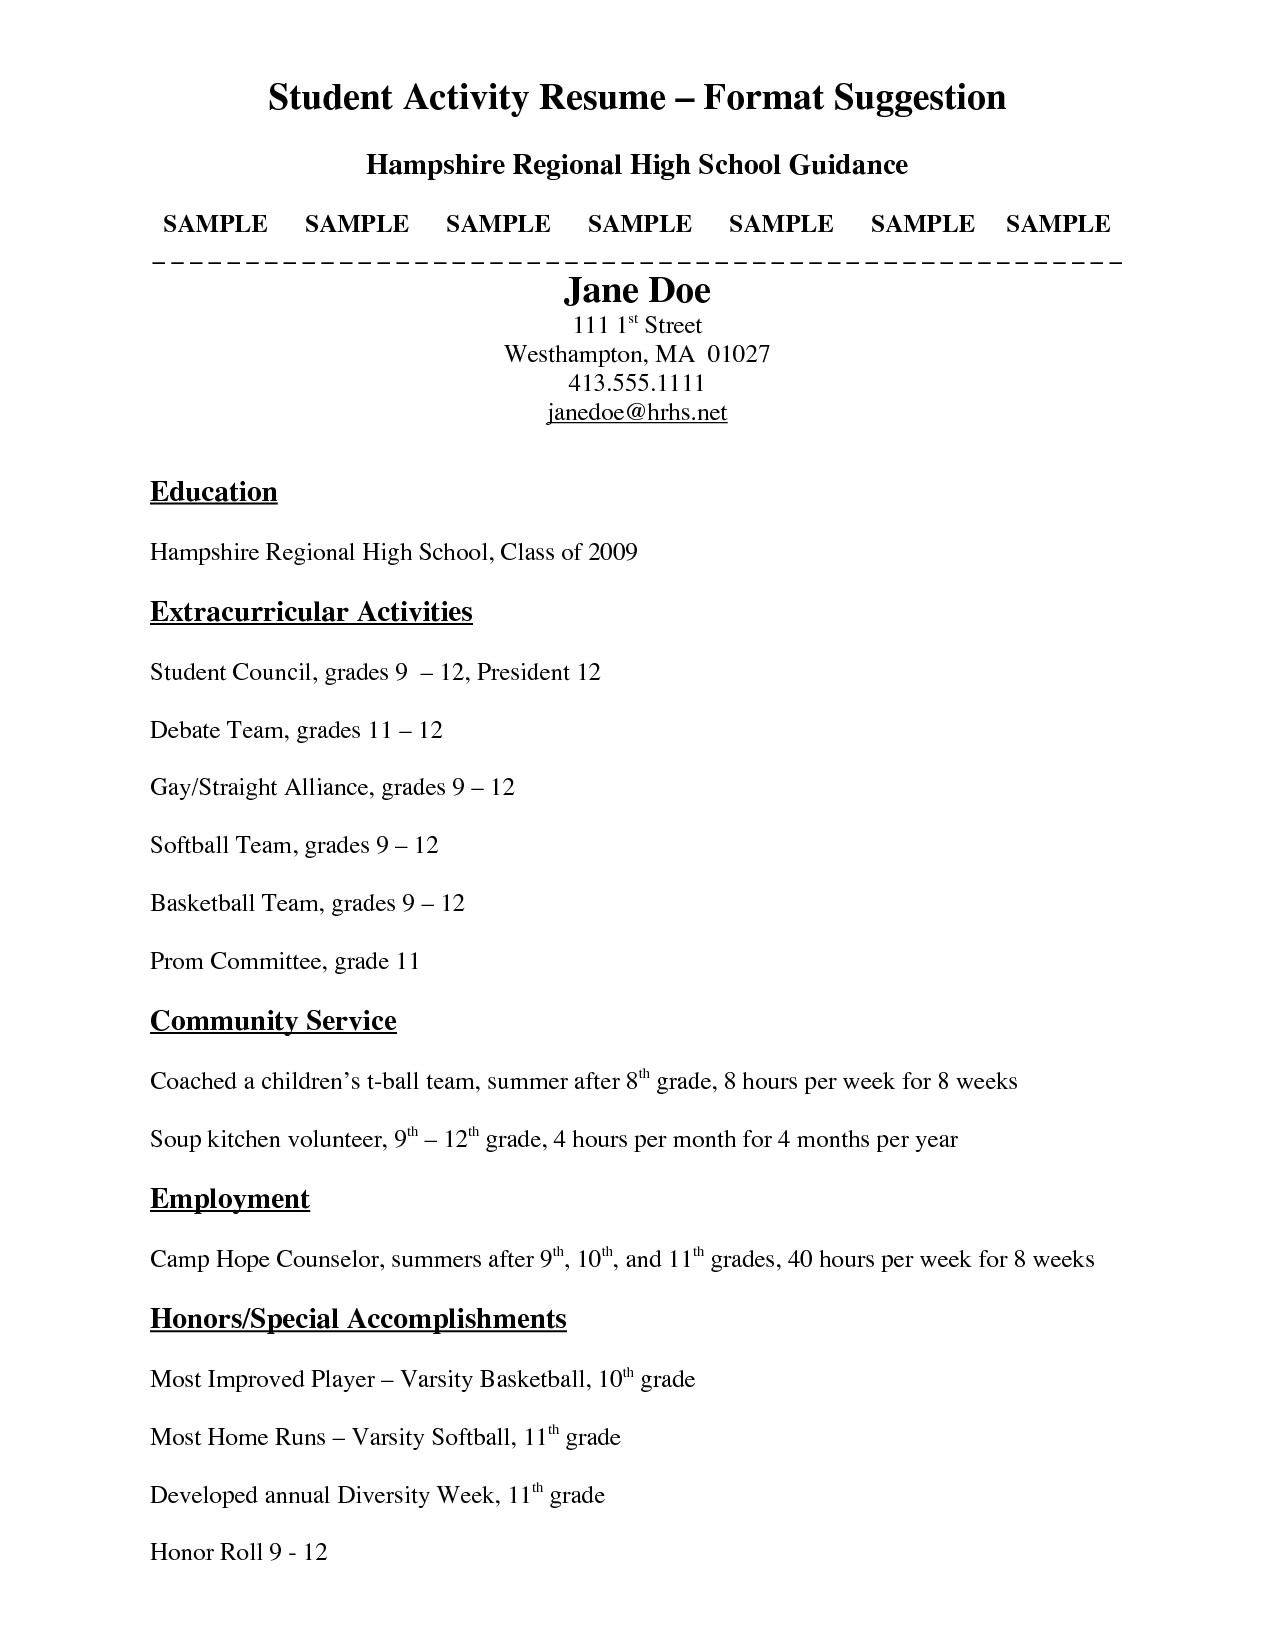 sample resume template for high school students activity free downloads